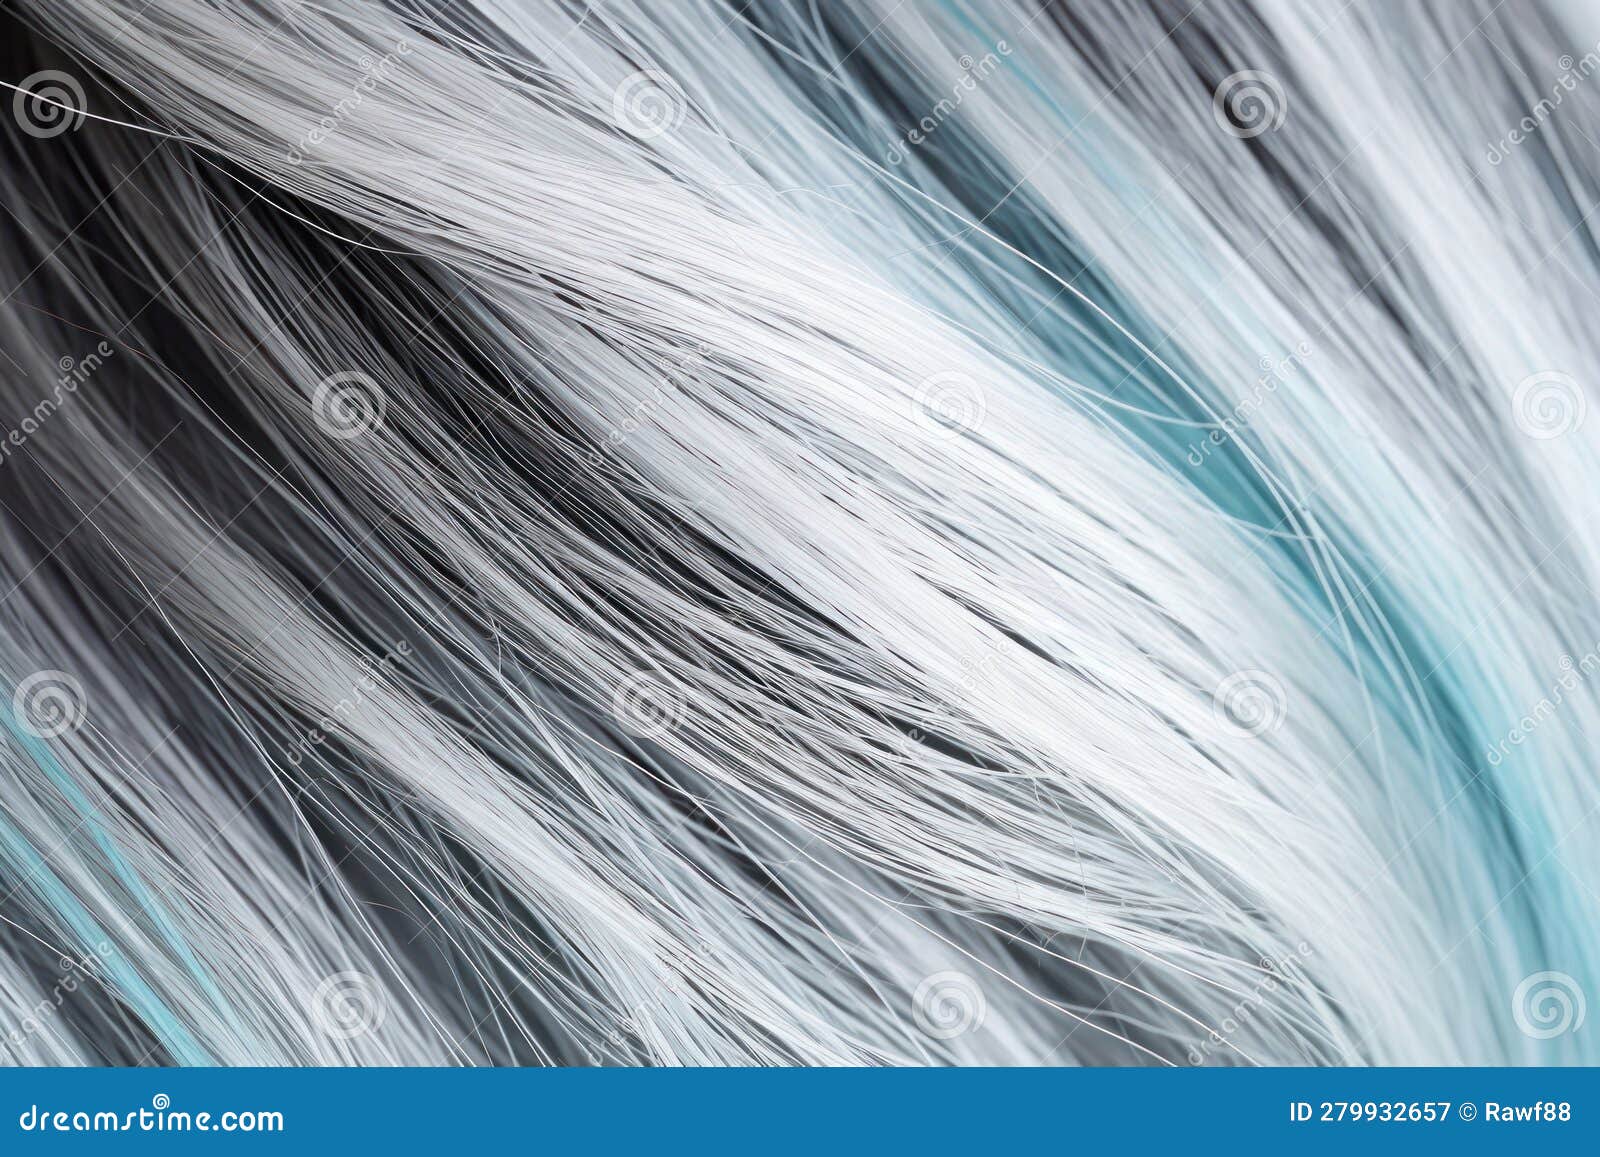 Pastel Blue Color Hair Texture Closeup. Wavy Light Blue and Gray Hair ...